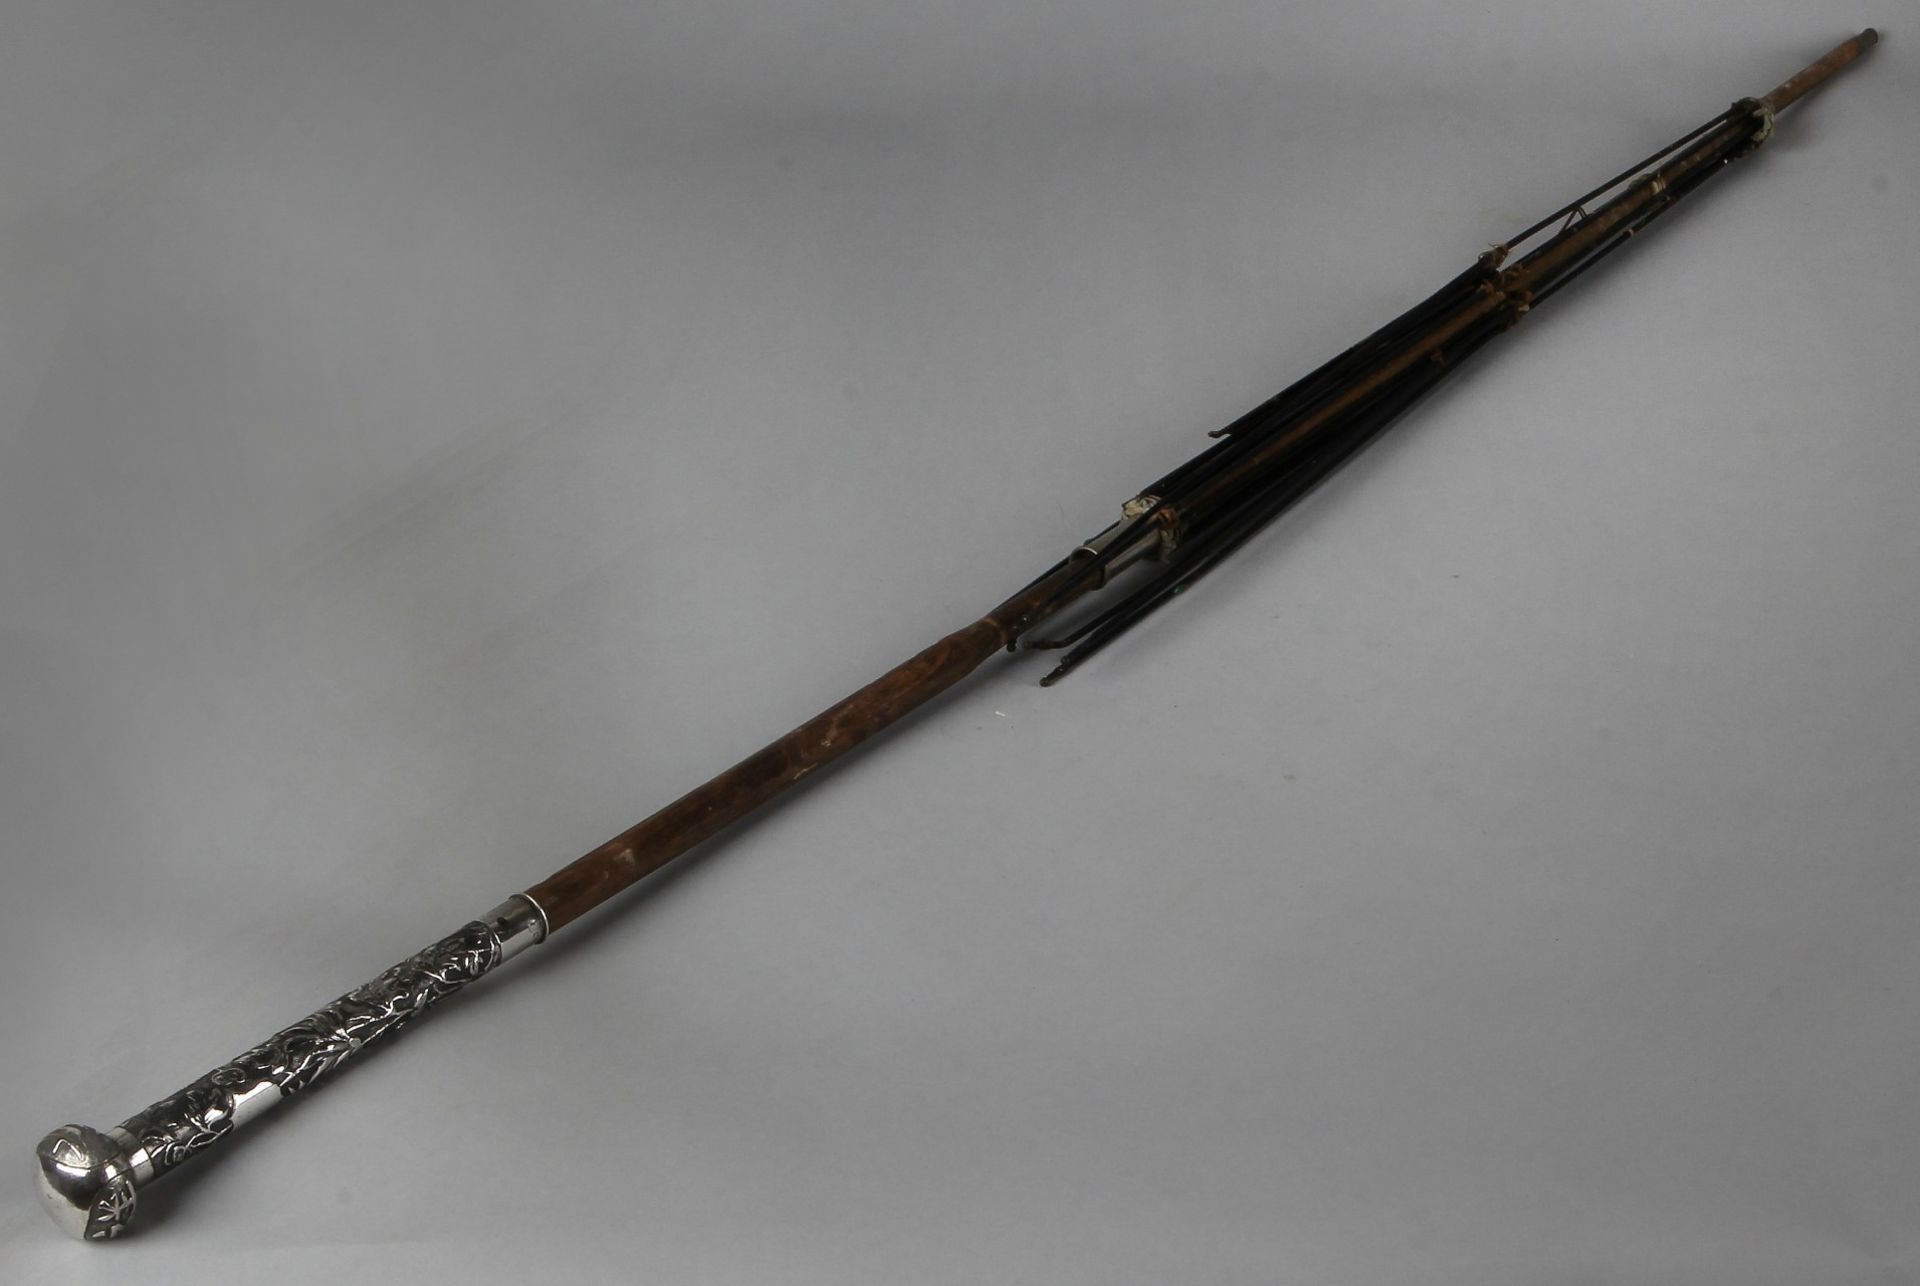 Frame of a Chinese umbrella with silver handle, provided with flower bud operation and at the tip.